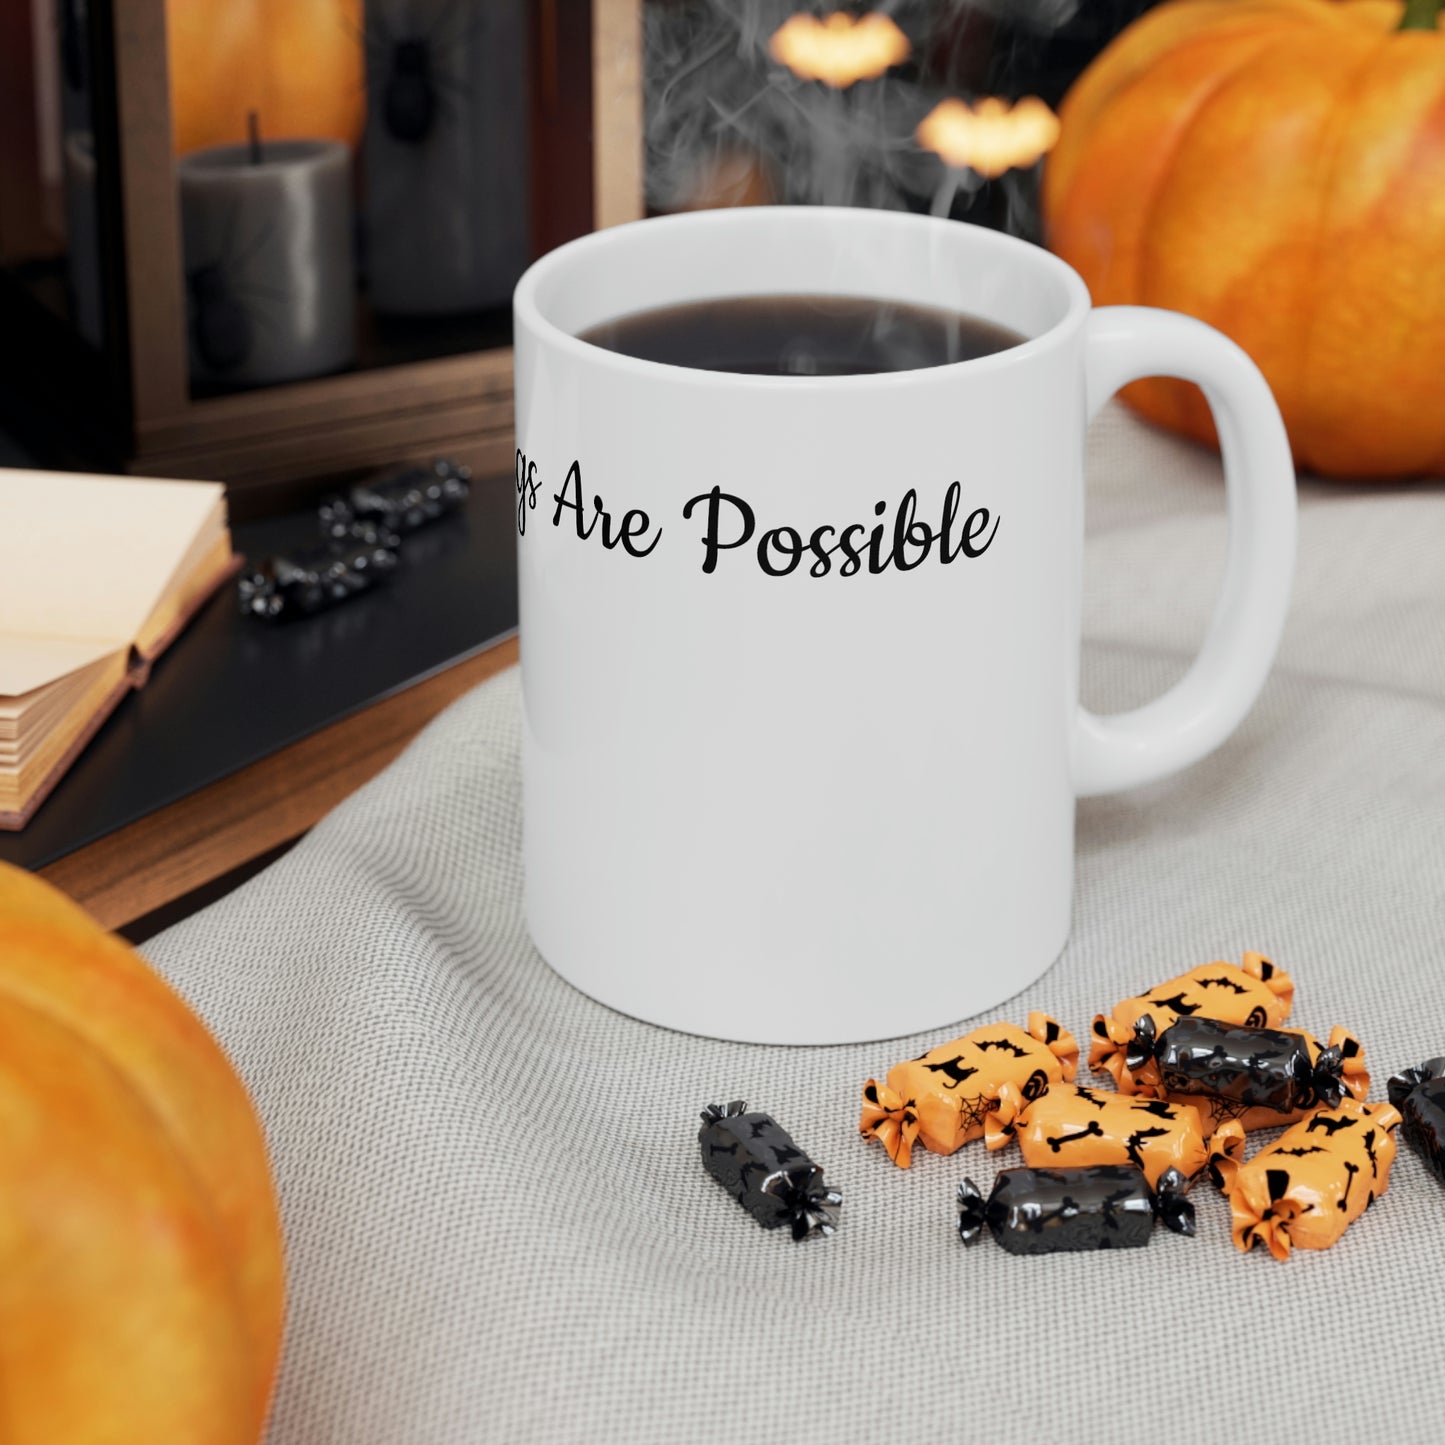 With God All Things Are Possible Ceramic Mug 11oz